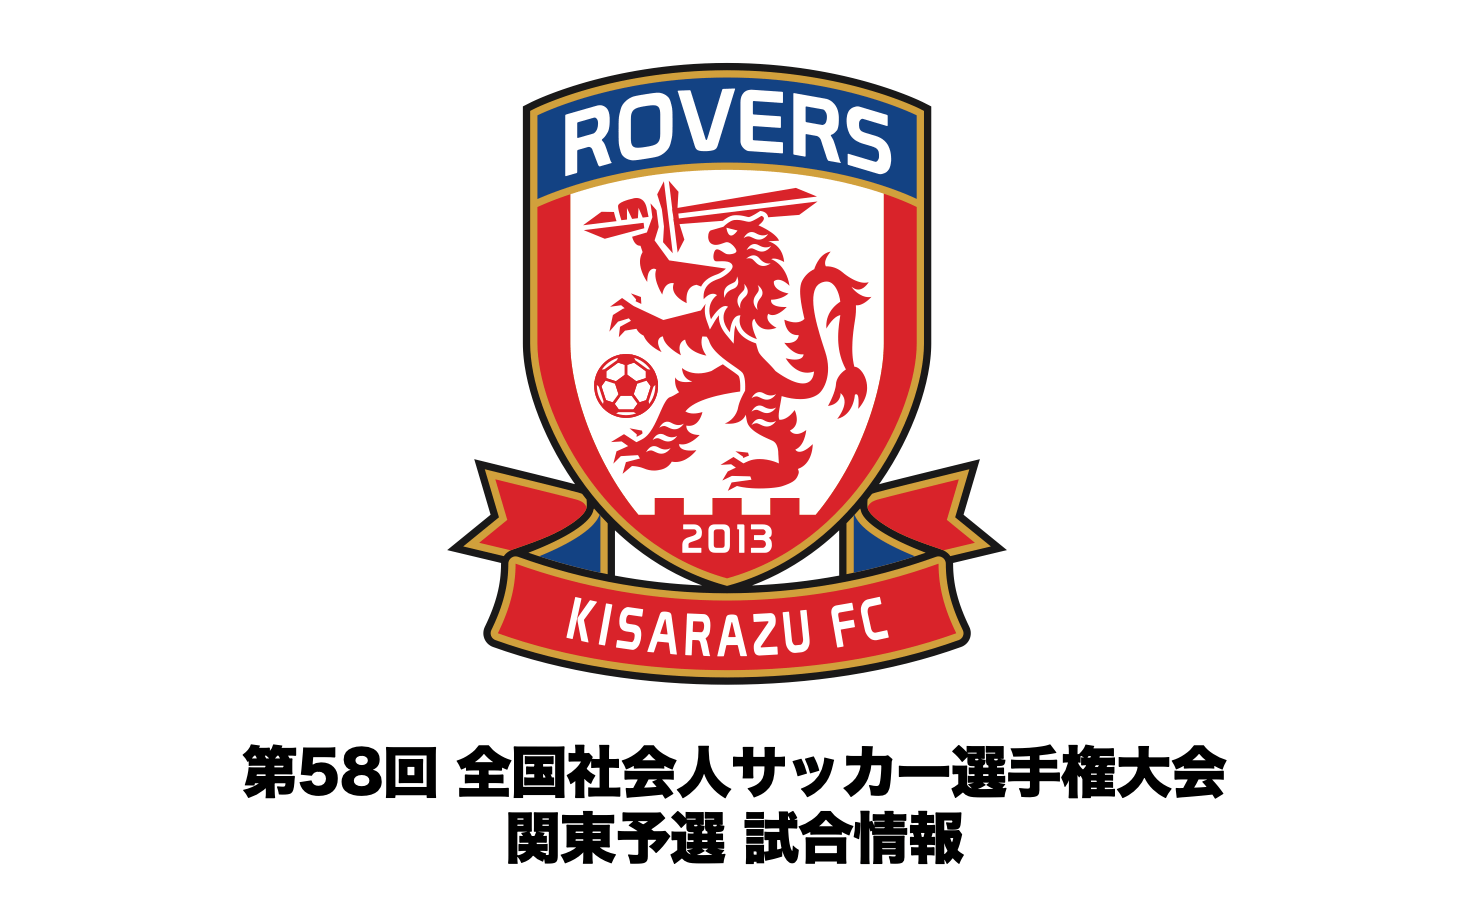 You are currently viewing 【試合情報】第58回全国社会人サッカー選手権大会 関東予選について